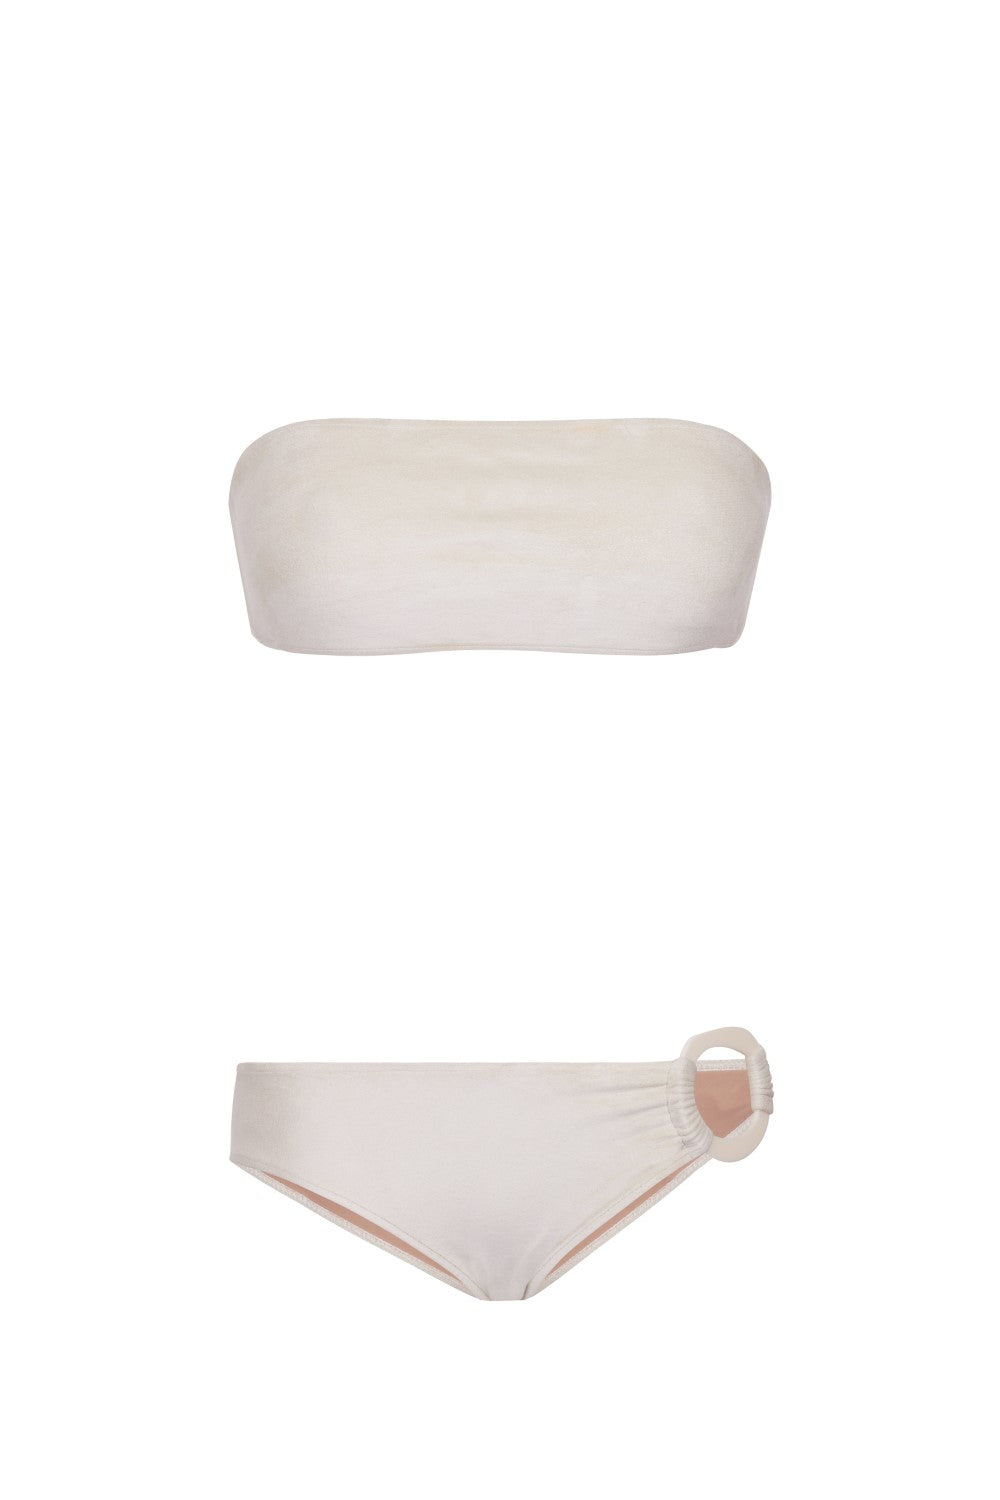 This strapless top bandeau bikini is ideal for those with smaller busts and comes with low-rise briefs with a chic resin buckle detail